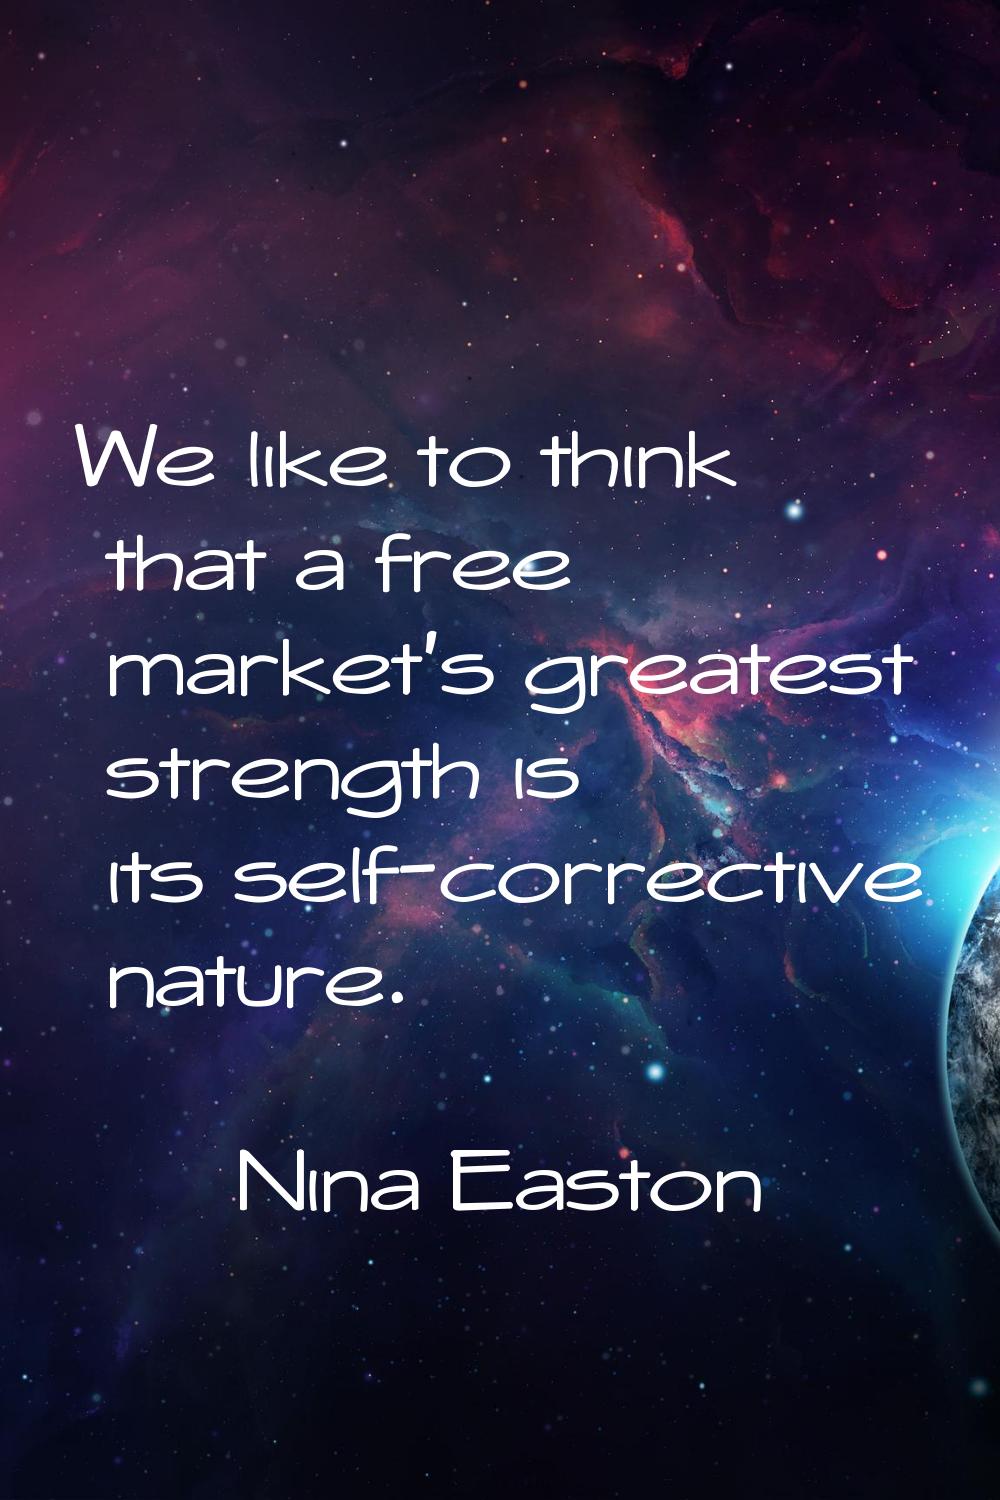 We like to think that a free market's greatest strength is its self-corrective nature.